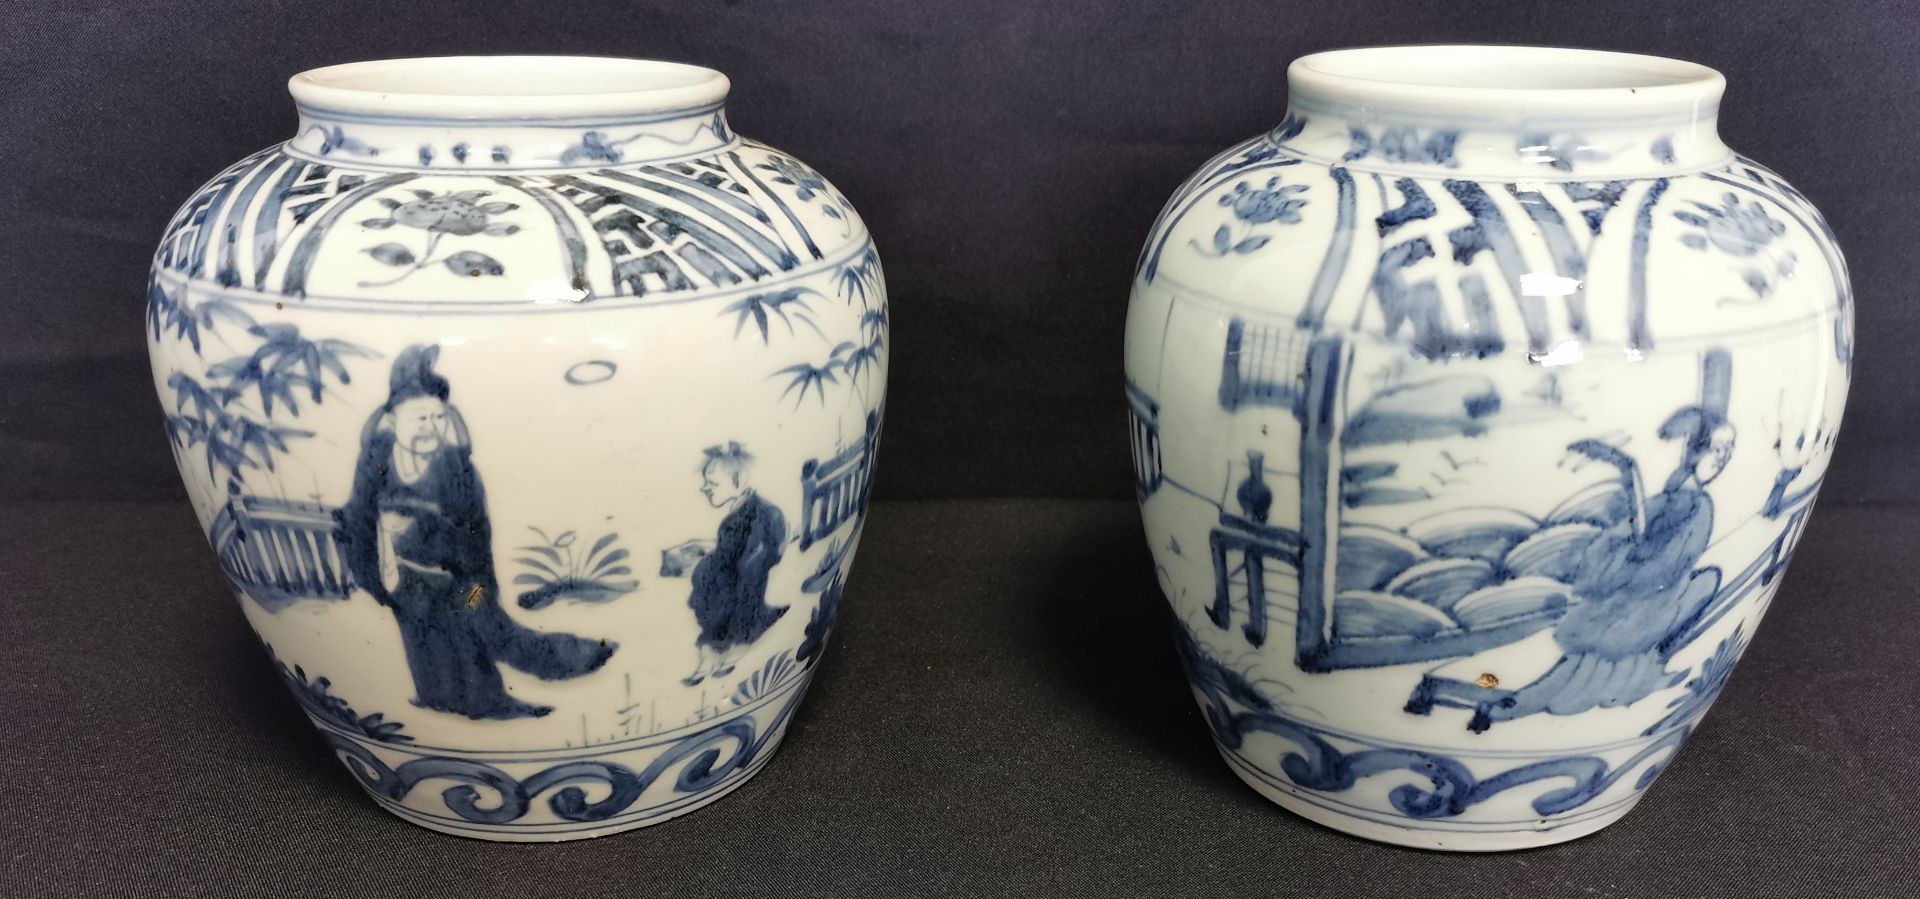 VASES WITH BLUE PAINTING - Image 2 of 6